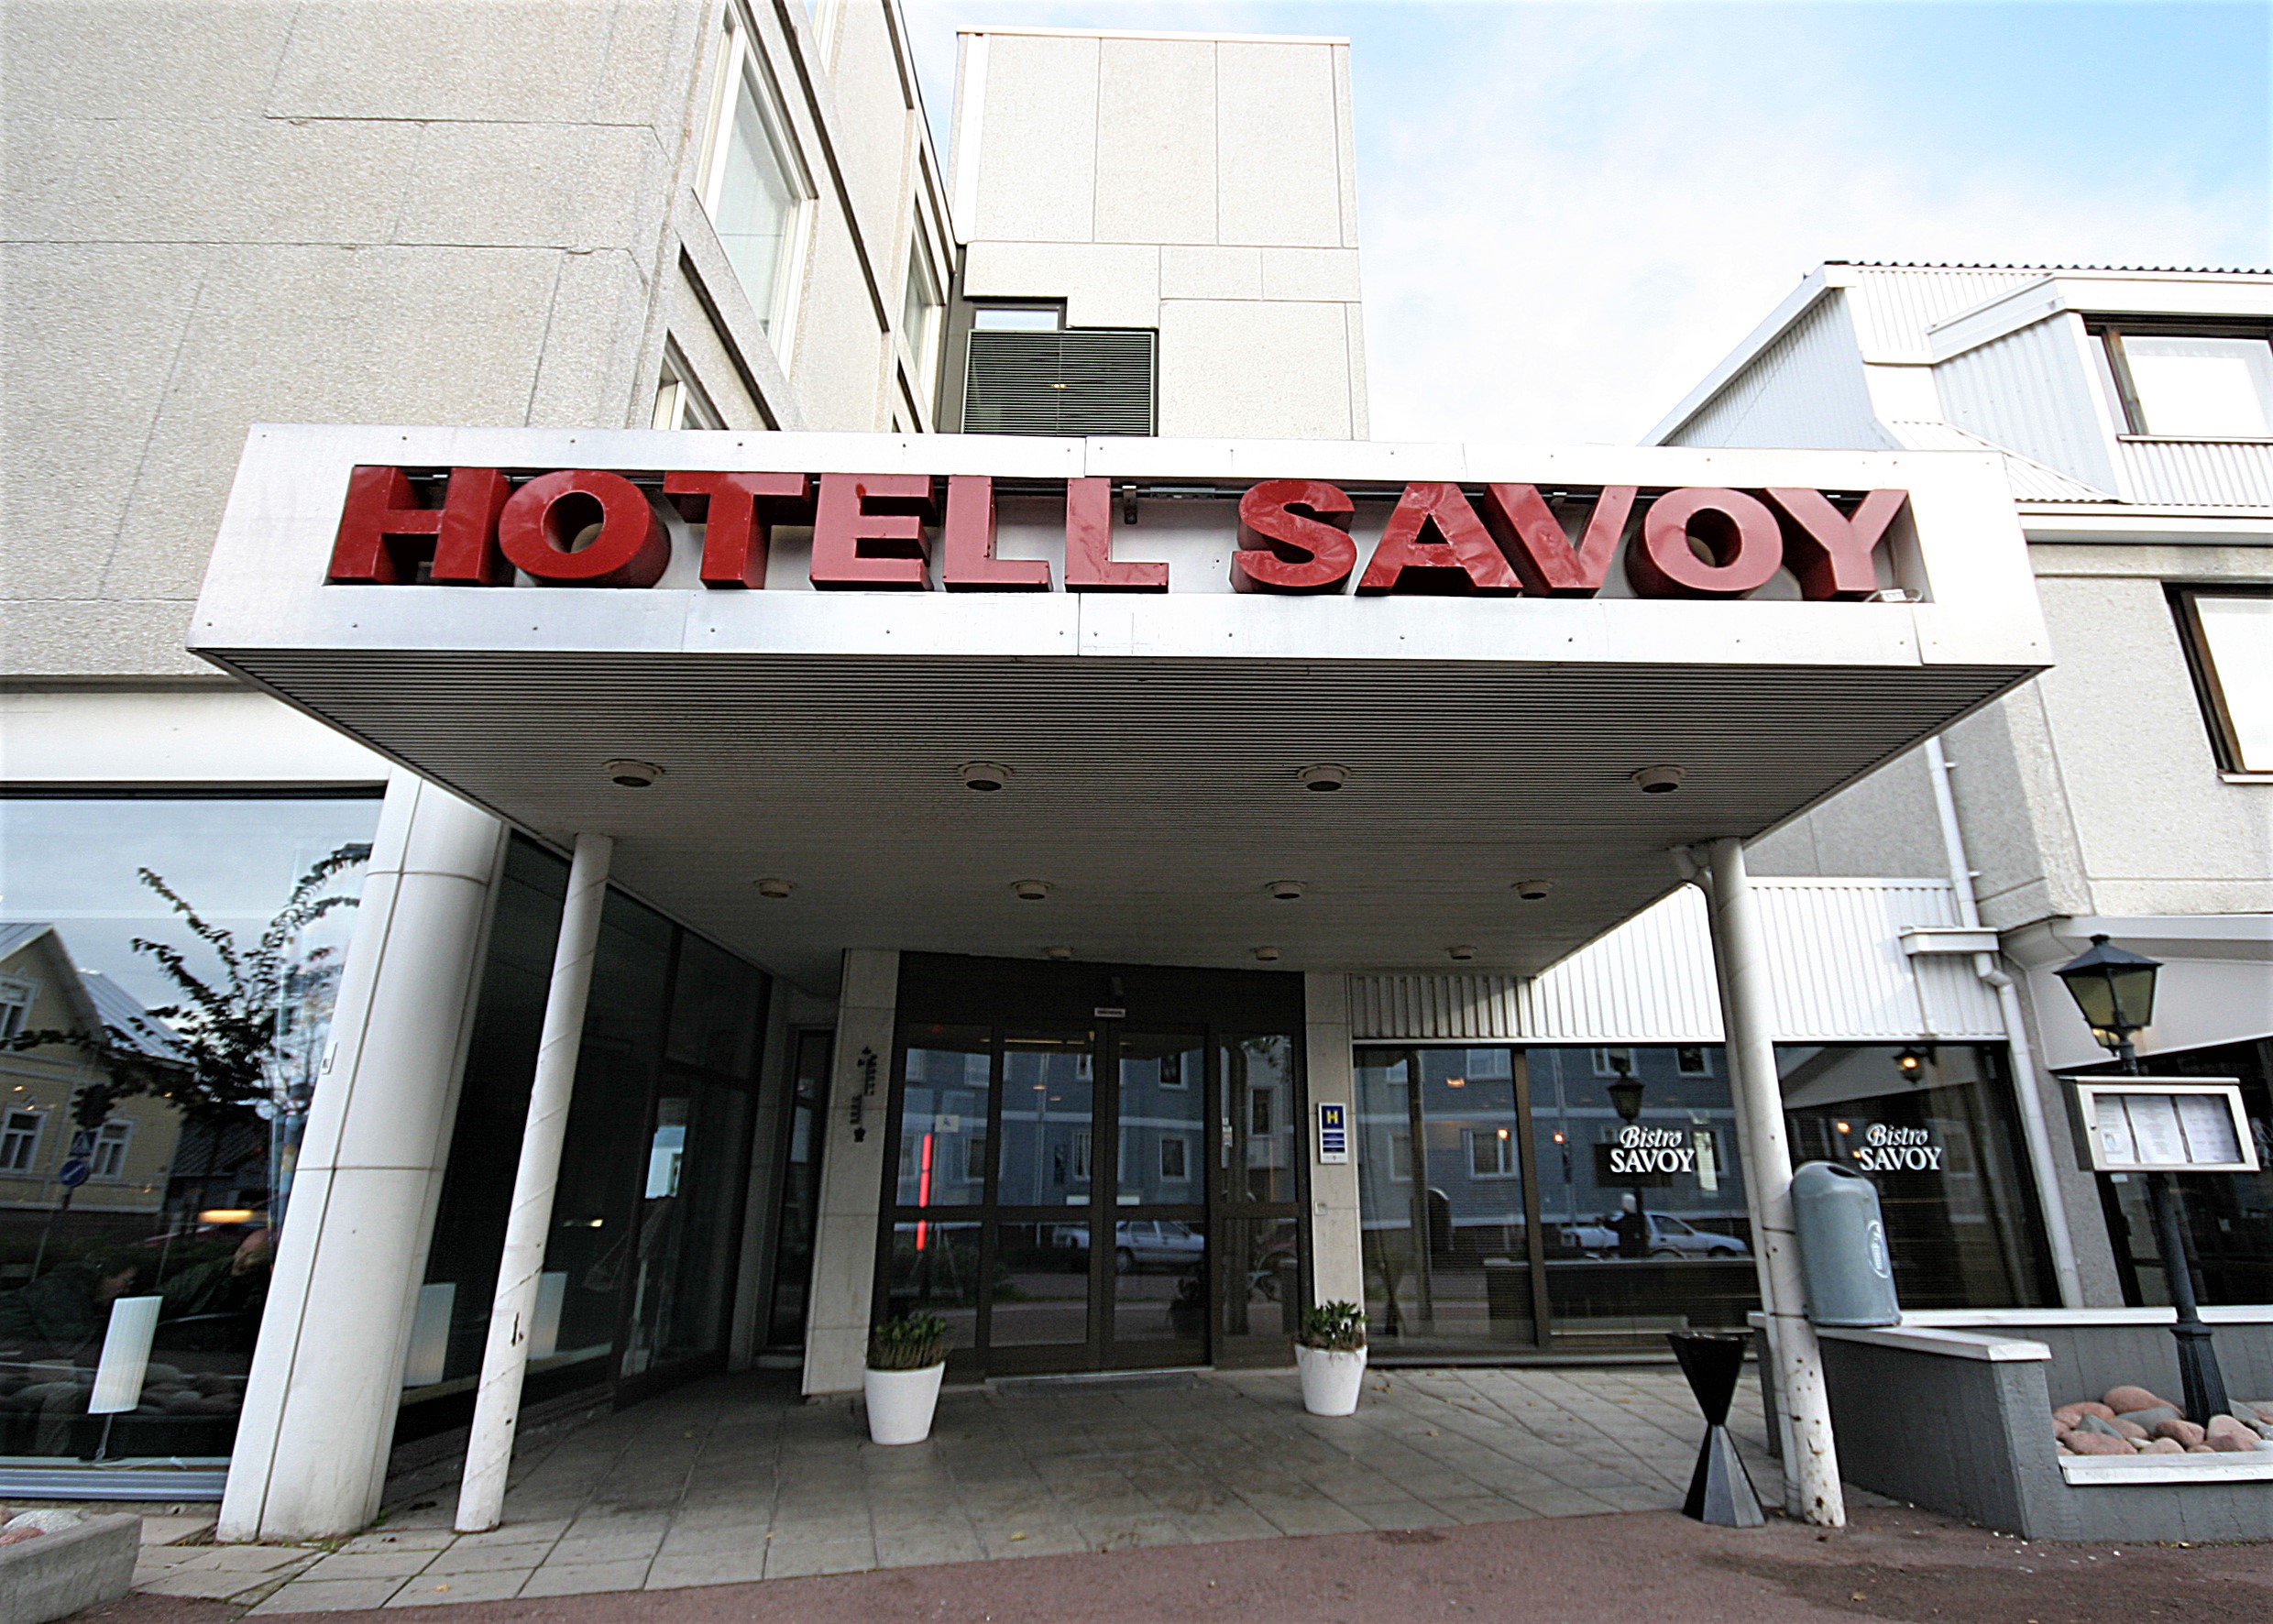 Hotell Savoy <br/>119.00 ew <br/> <a href='http://vakantieoplossing.nl/outpage/?id=55d81ac3f74df8d93290bec0dd9eb3c3' target='_blank'>View Details</a>